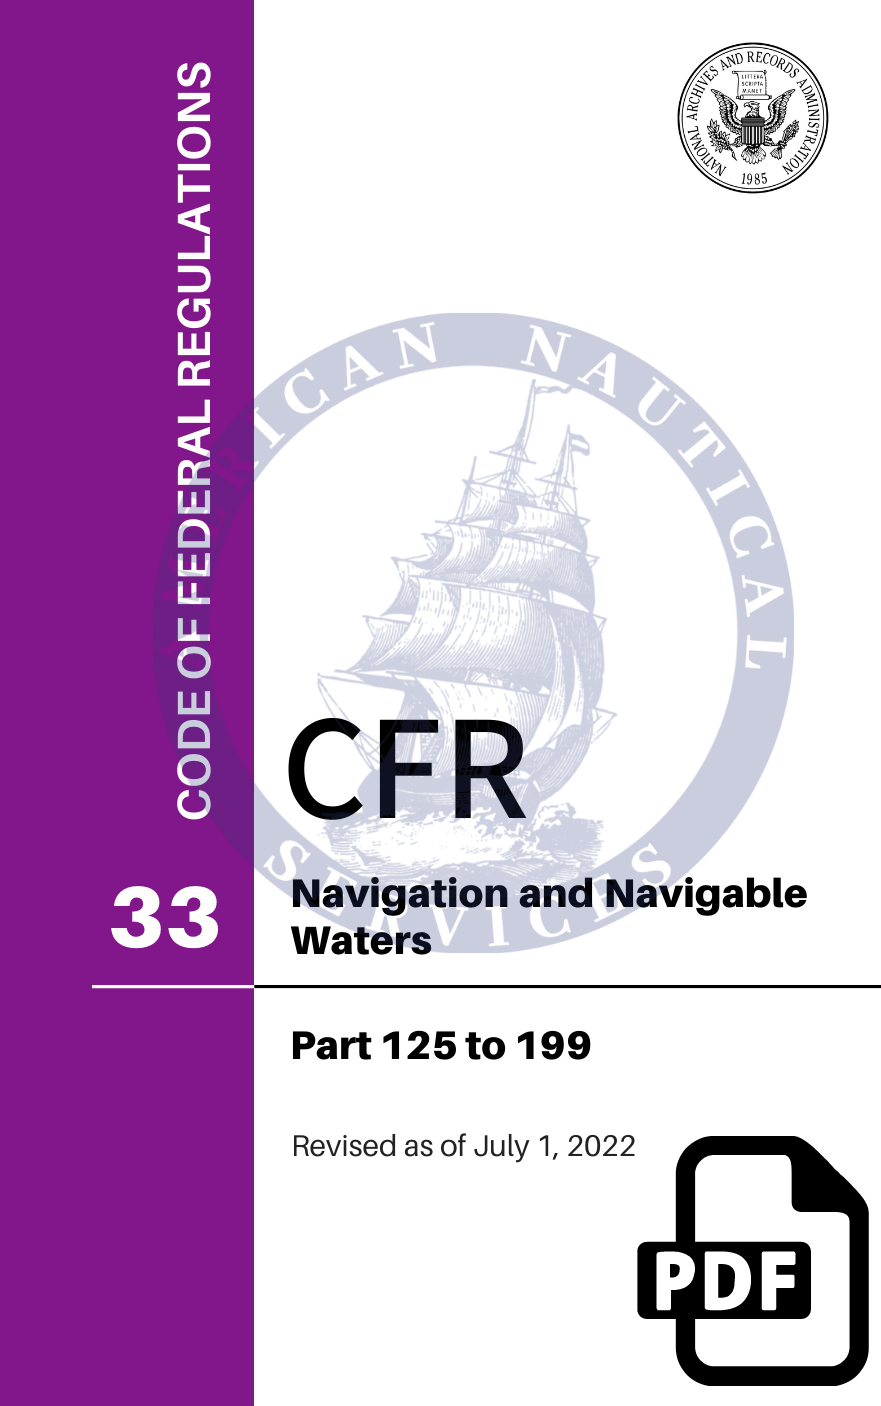 CFR Title 33: Parts 125-199 - Navigation and Navigable Waters (Code of Federal Regulations) Revised as of July 1, 2022